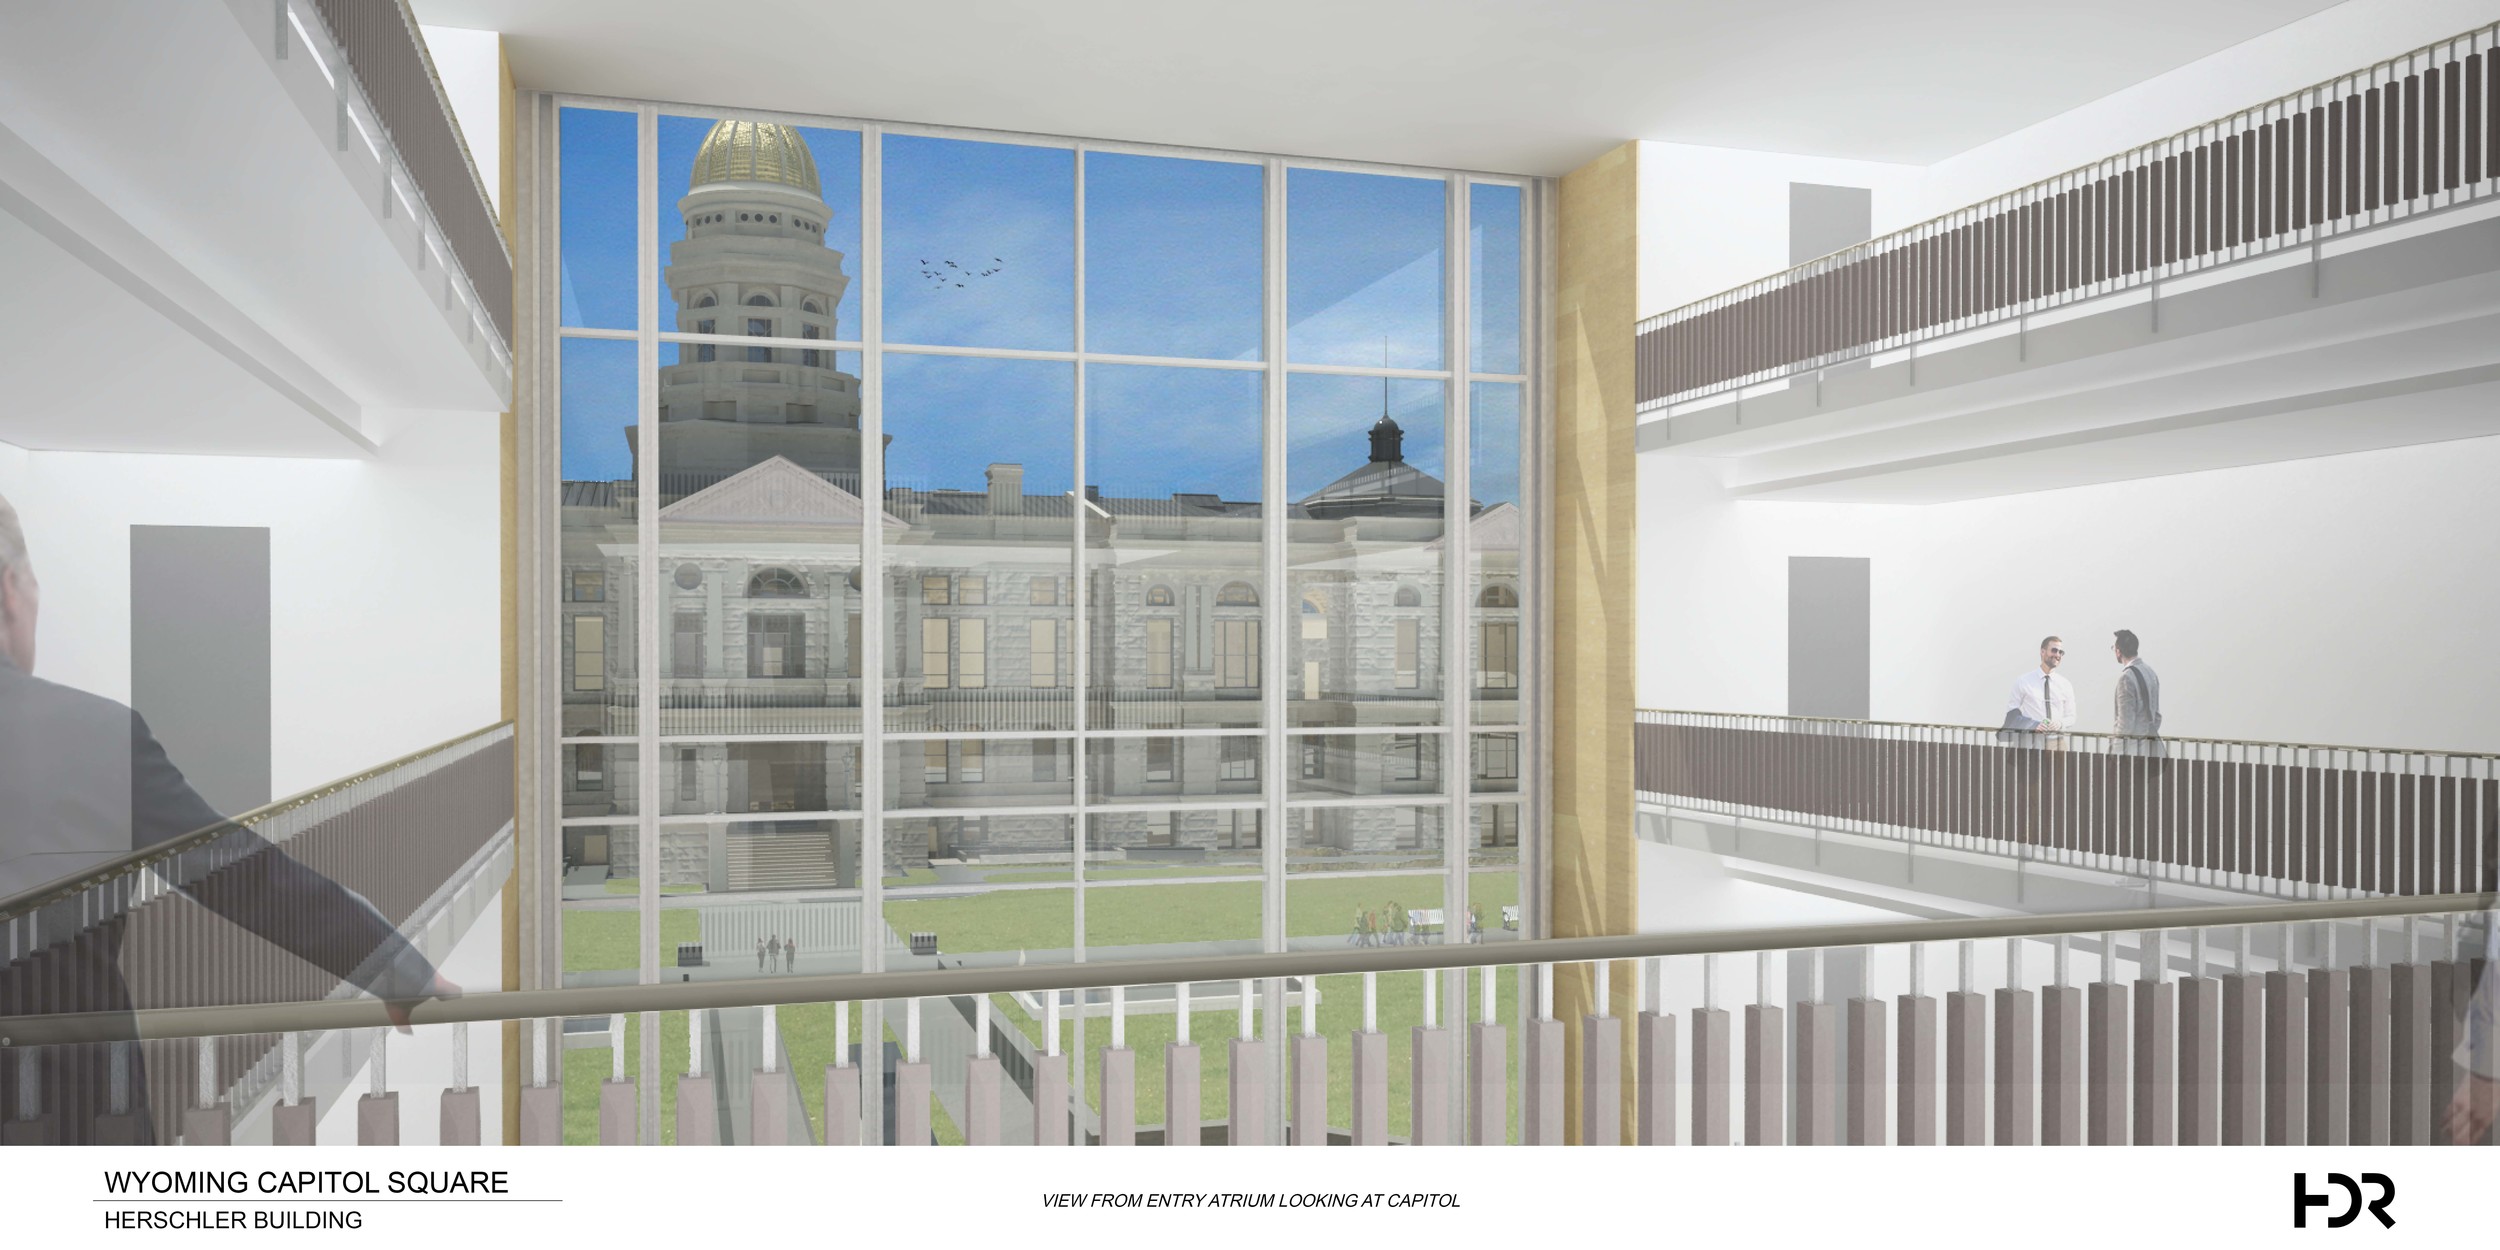 Conceptual drawing of the entry atrium in Herschler Building